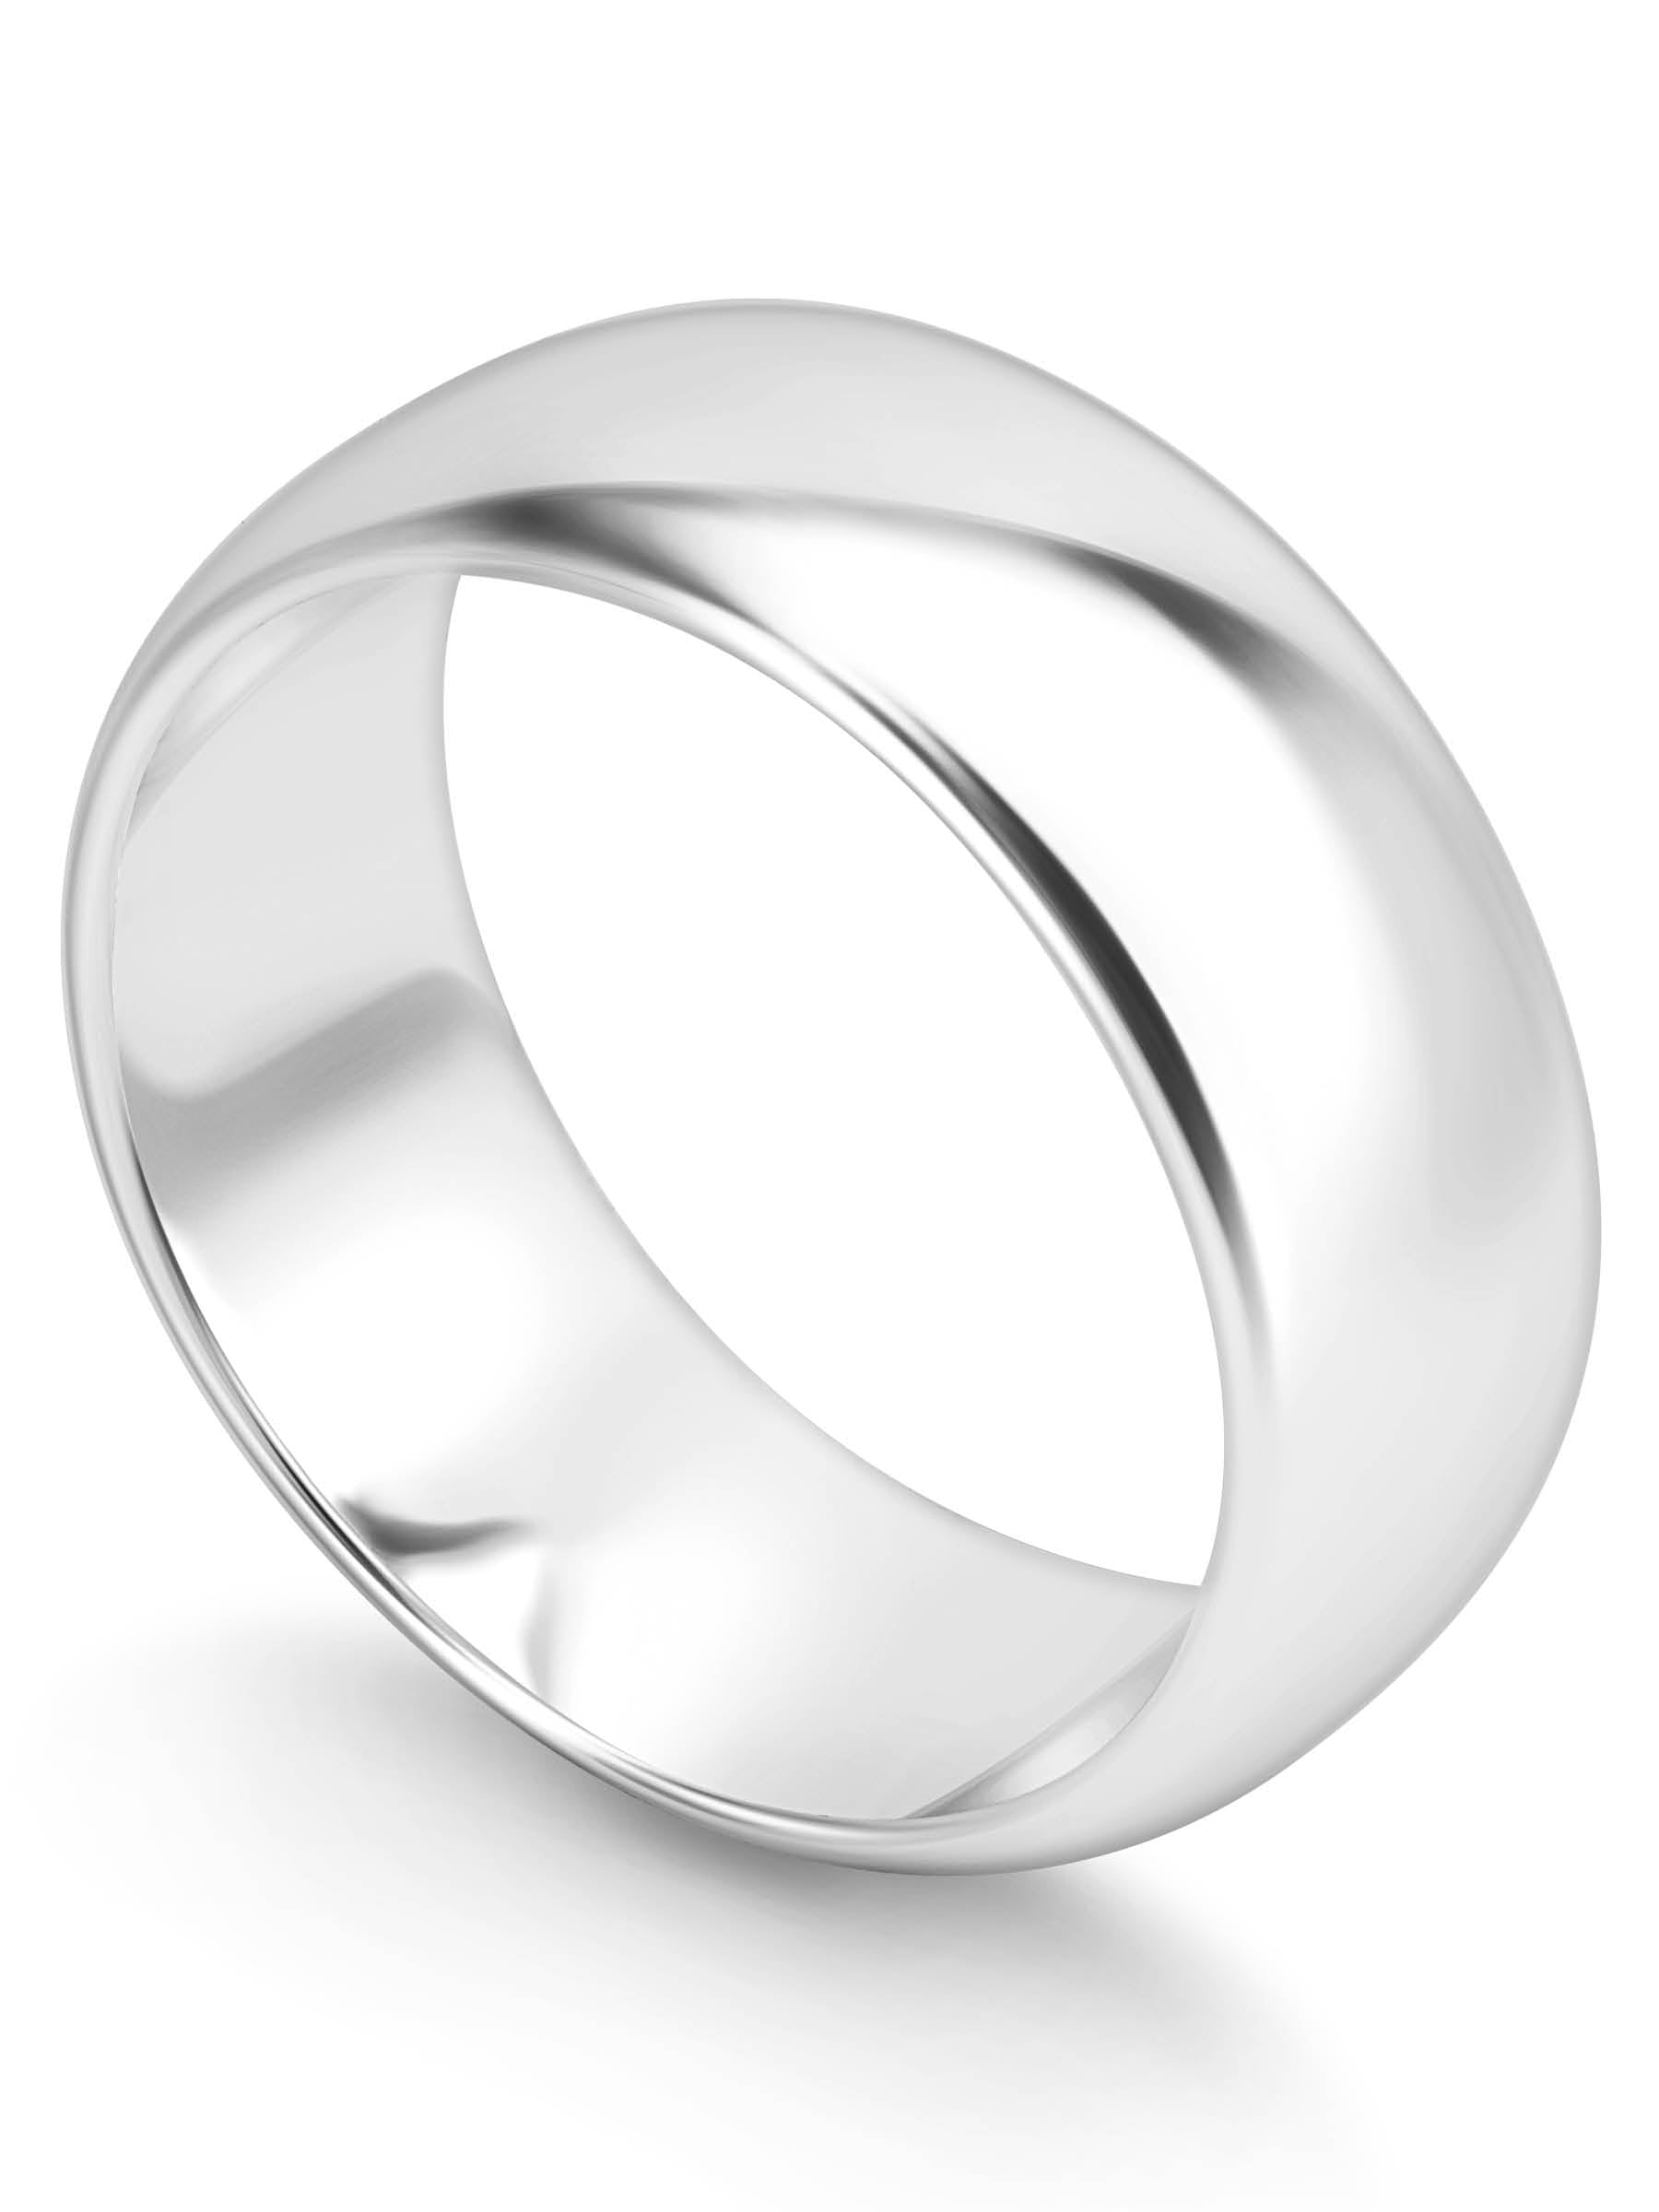 Sterling Silver Wedding Band 8mm Men or Women Bridal Ring Size 8